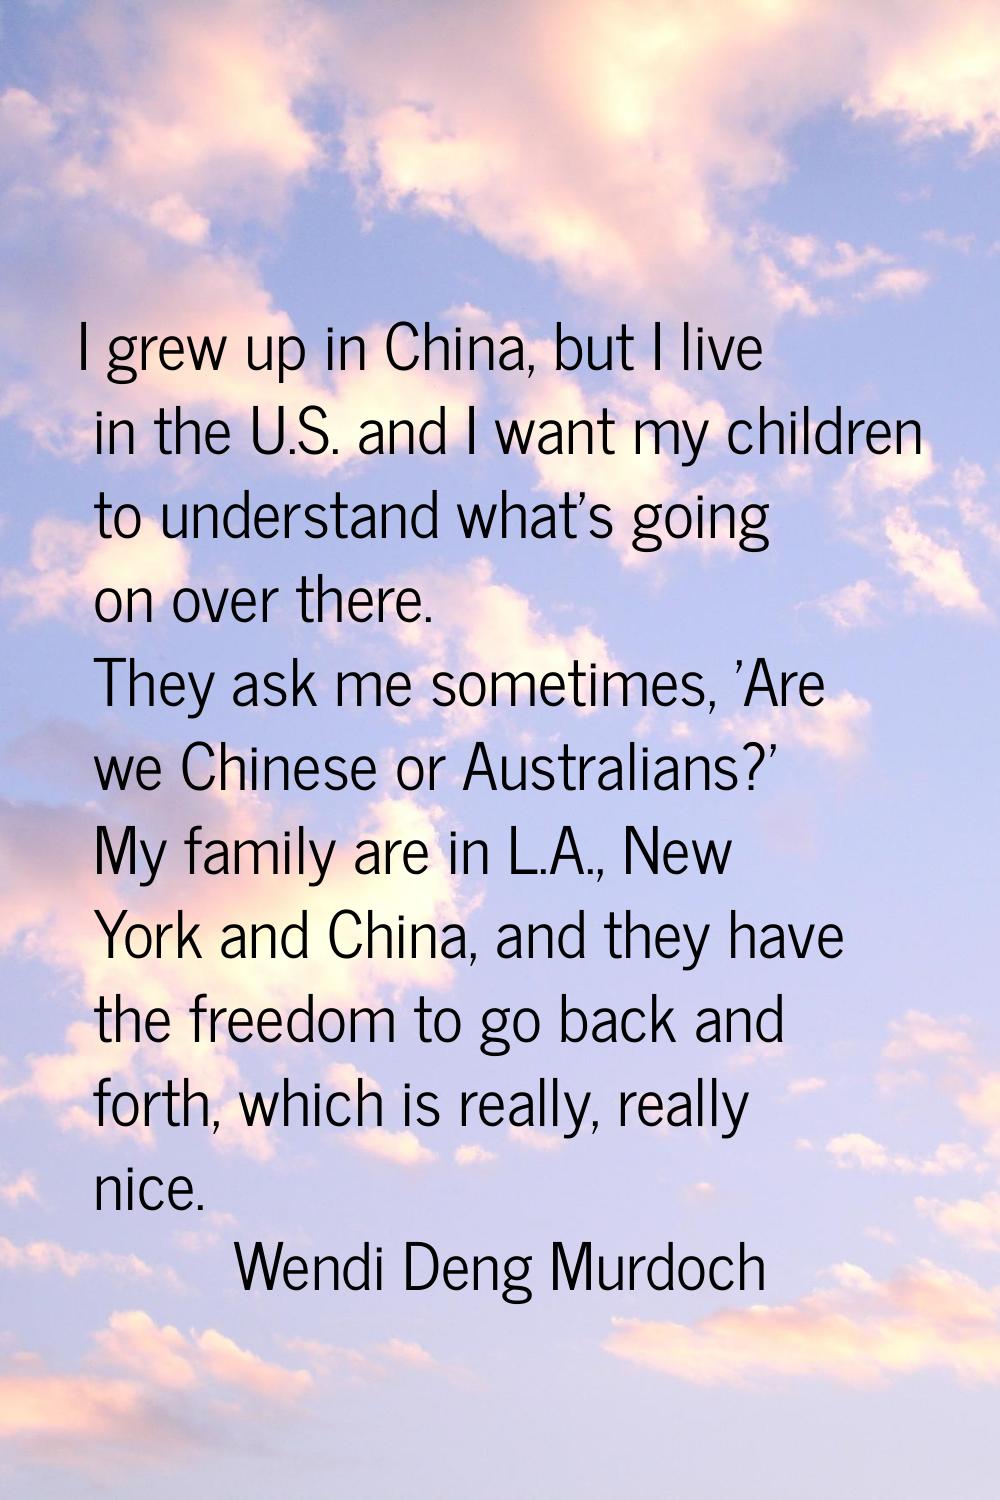 I grew up in China, but I live in the U.S. and I want my children to understand what's going on ove